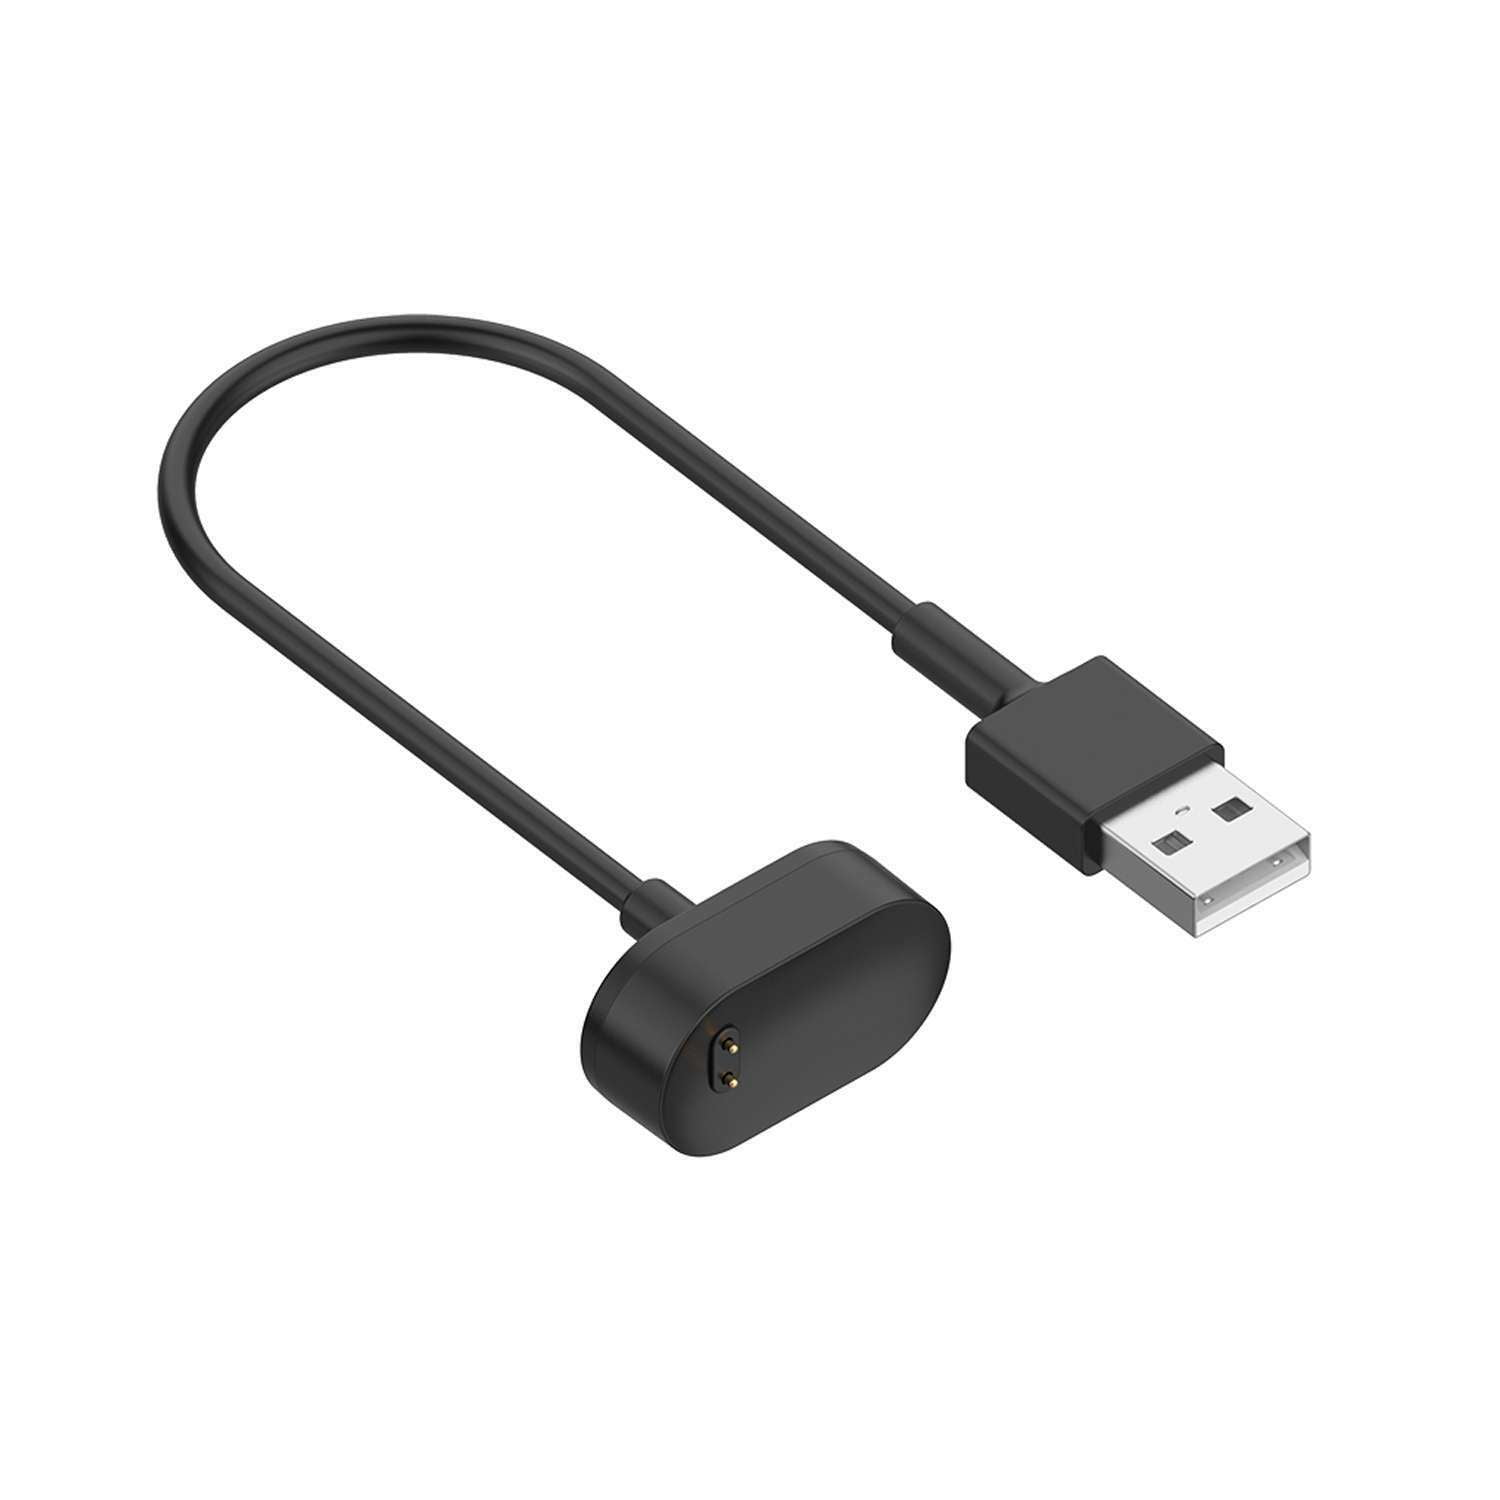 Replacement USB Charger Cable Dock For Fitbit Inspire Smart Tracker Charger Lead 